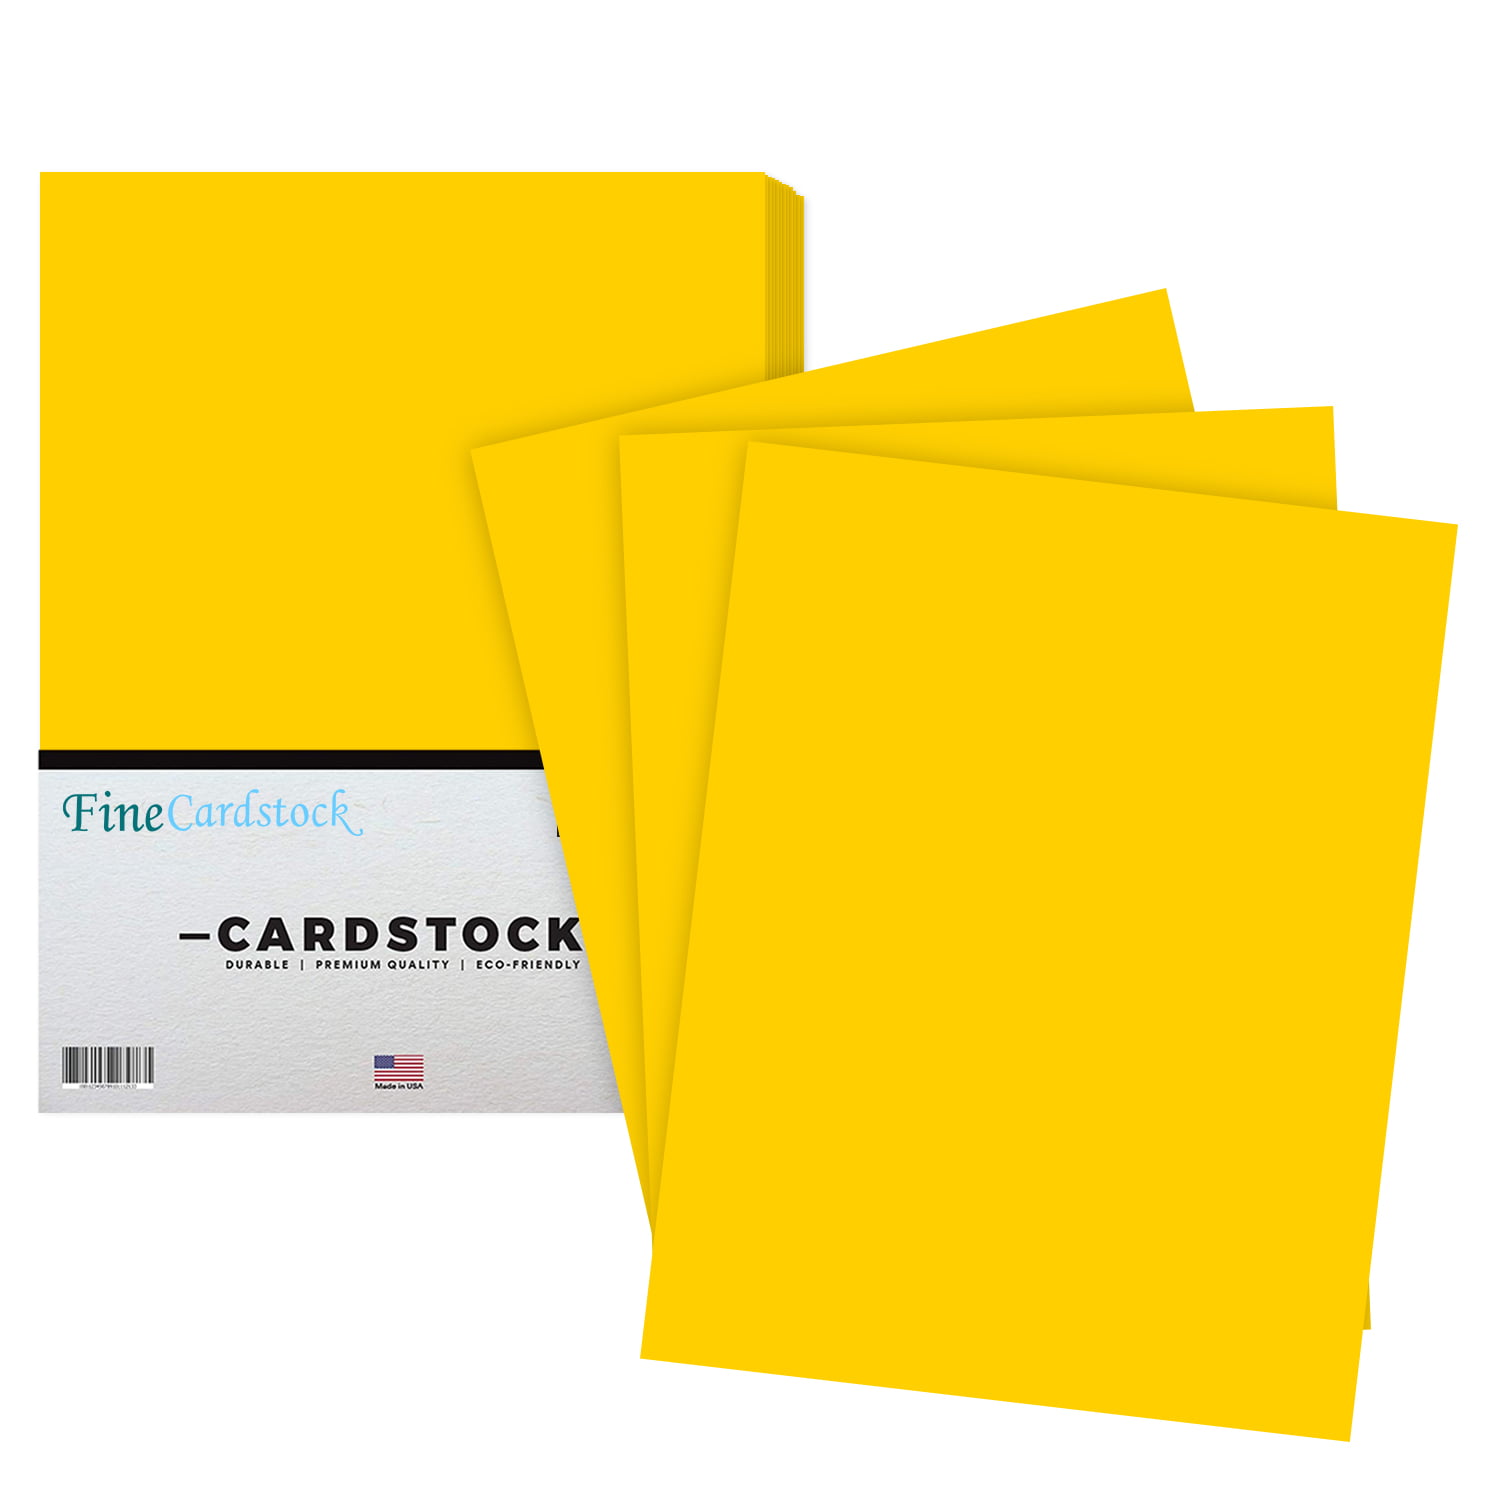 Cover Cardstock Paper Free Delivery. Premium Quality 8.5"x11" 65lb 